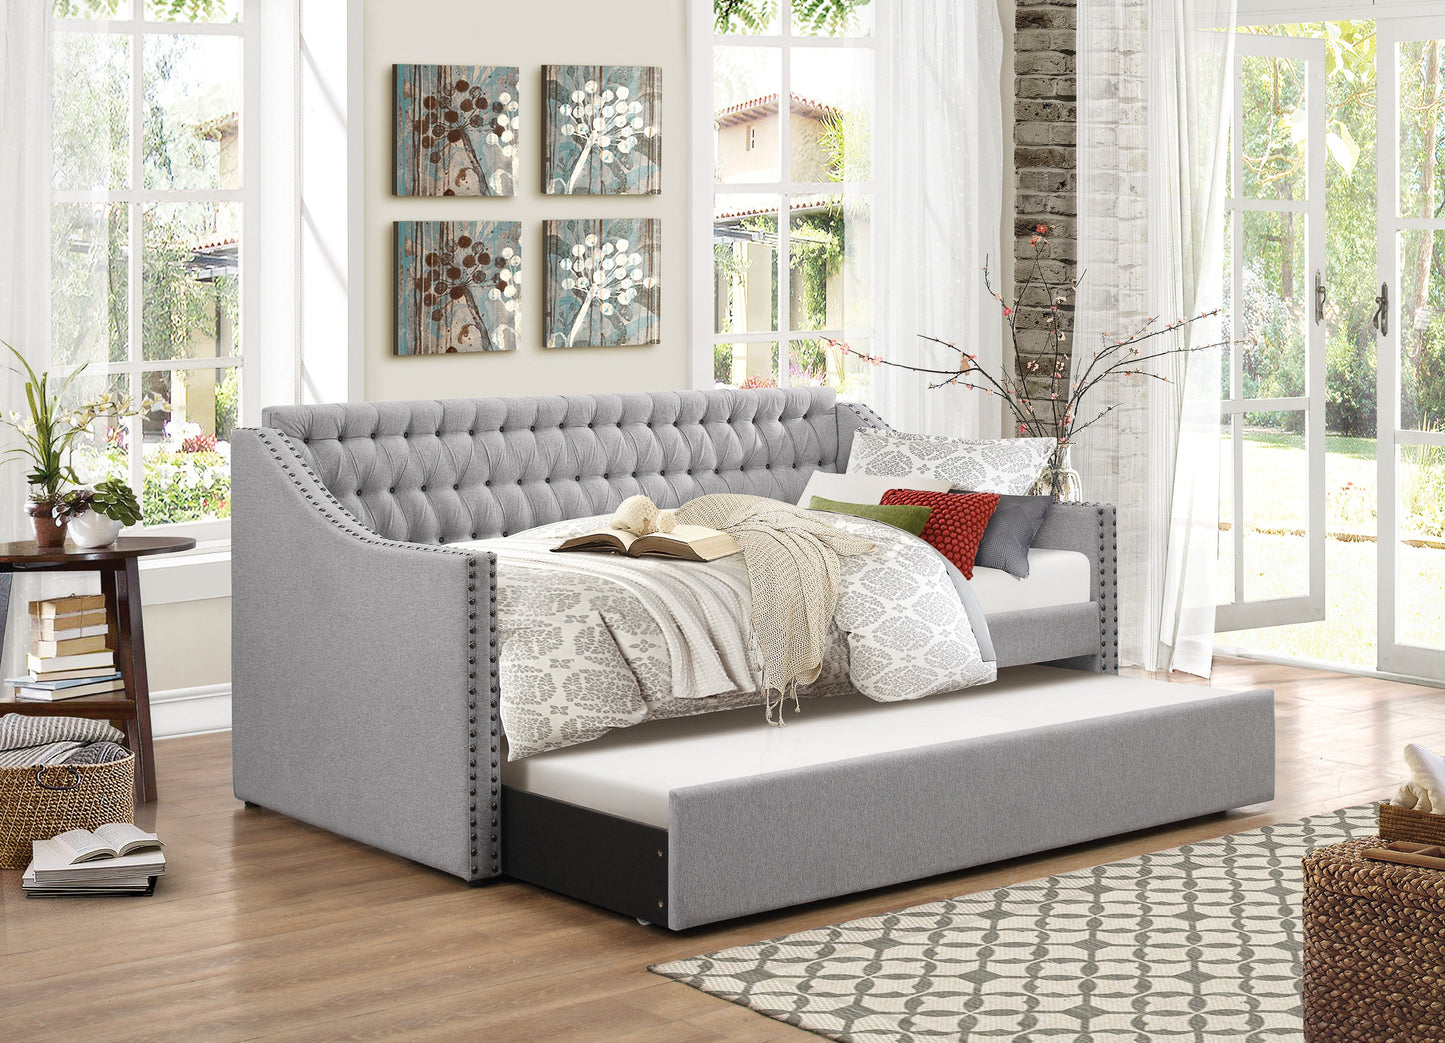 Tulney Gray Daybed with Trundle